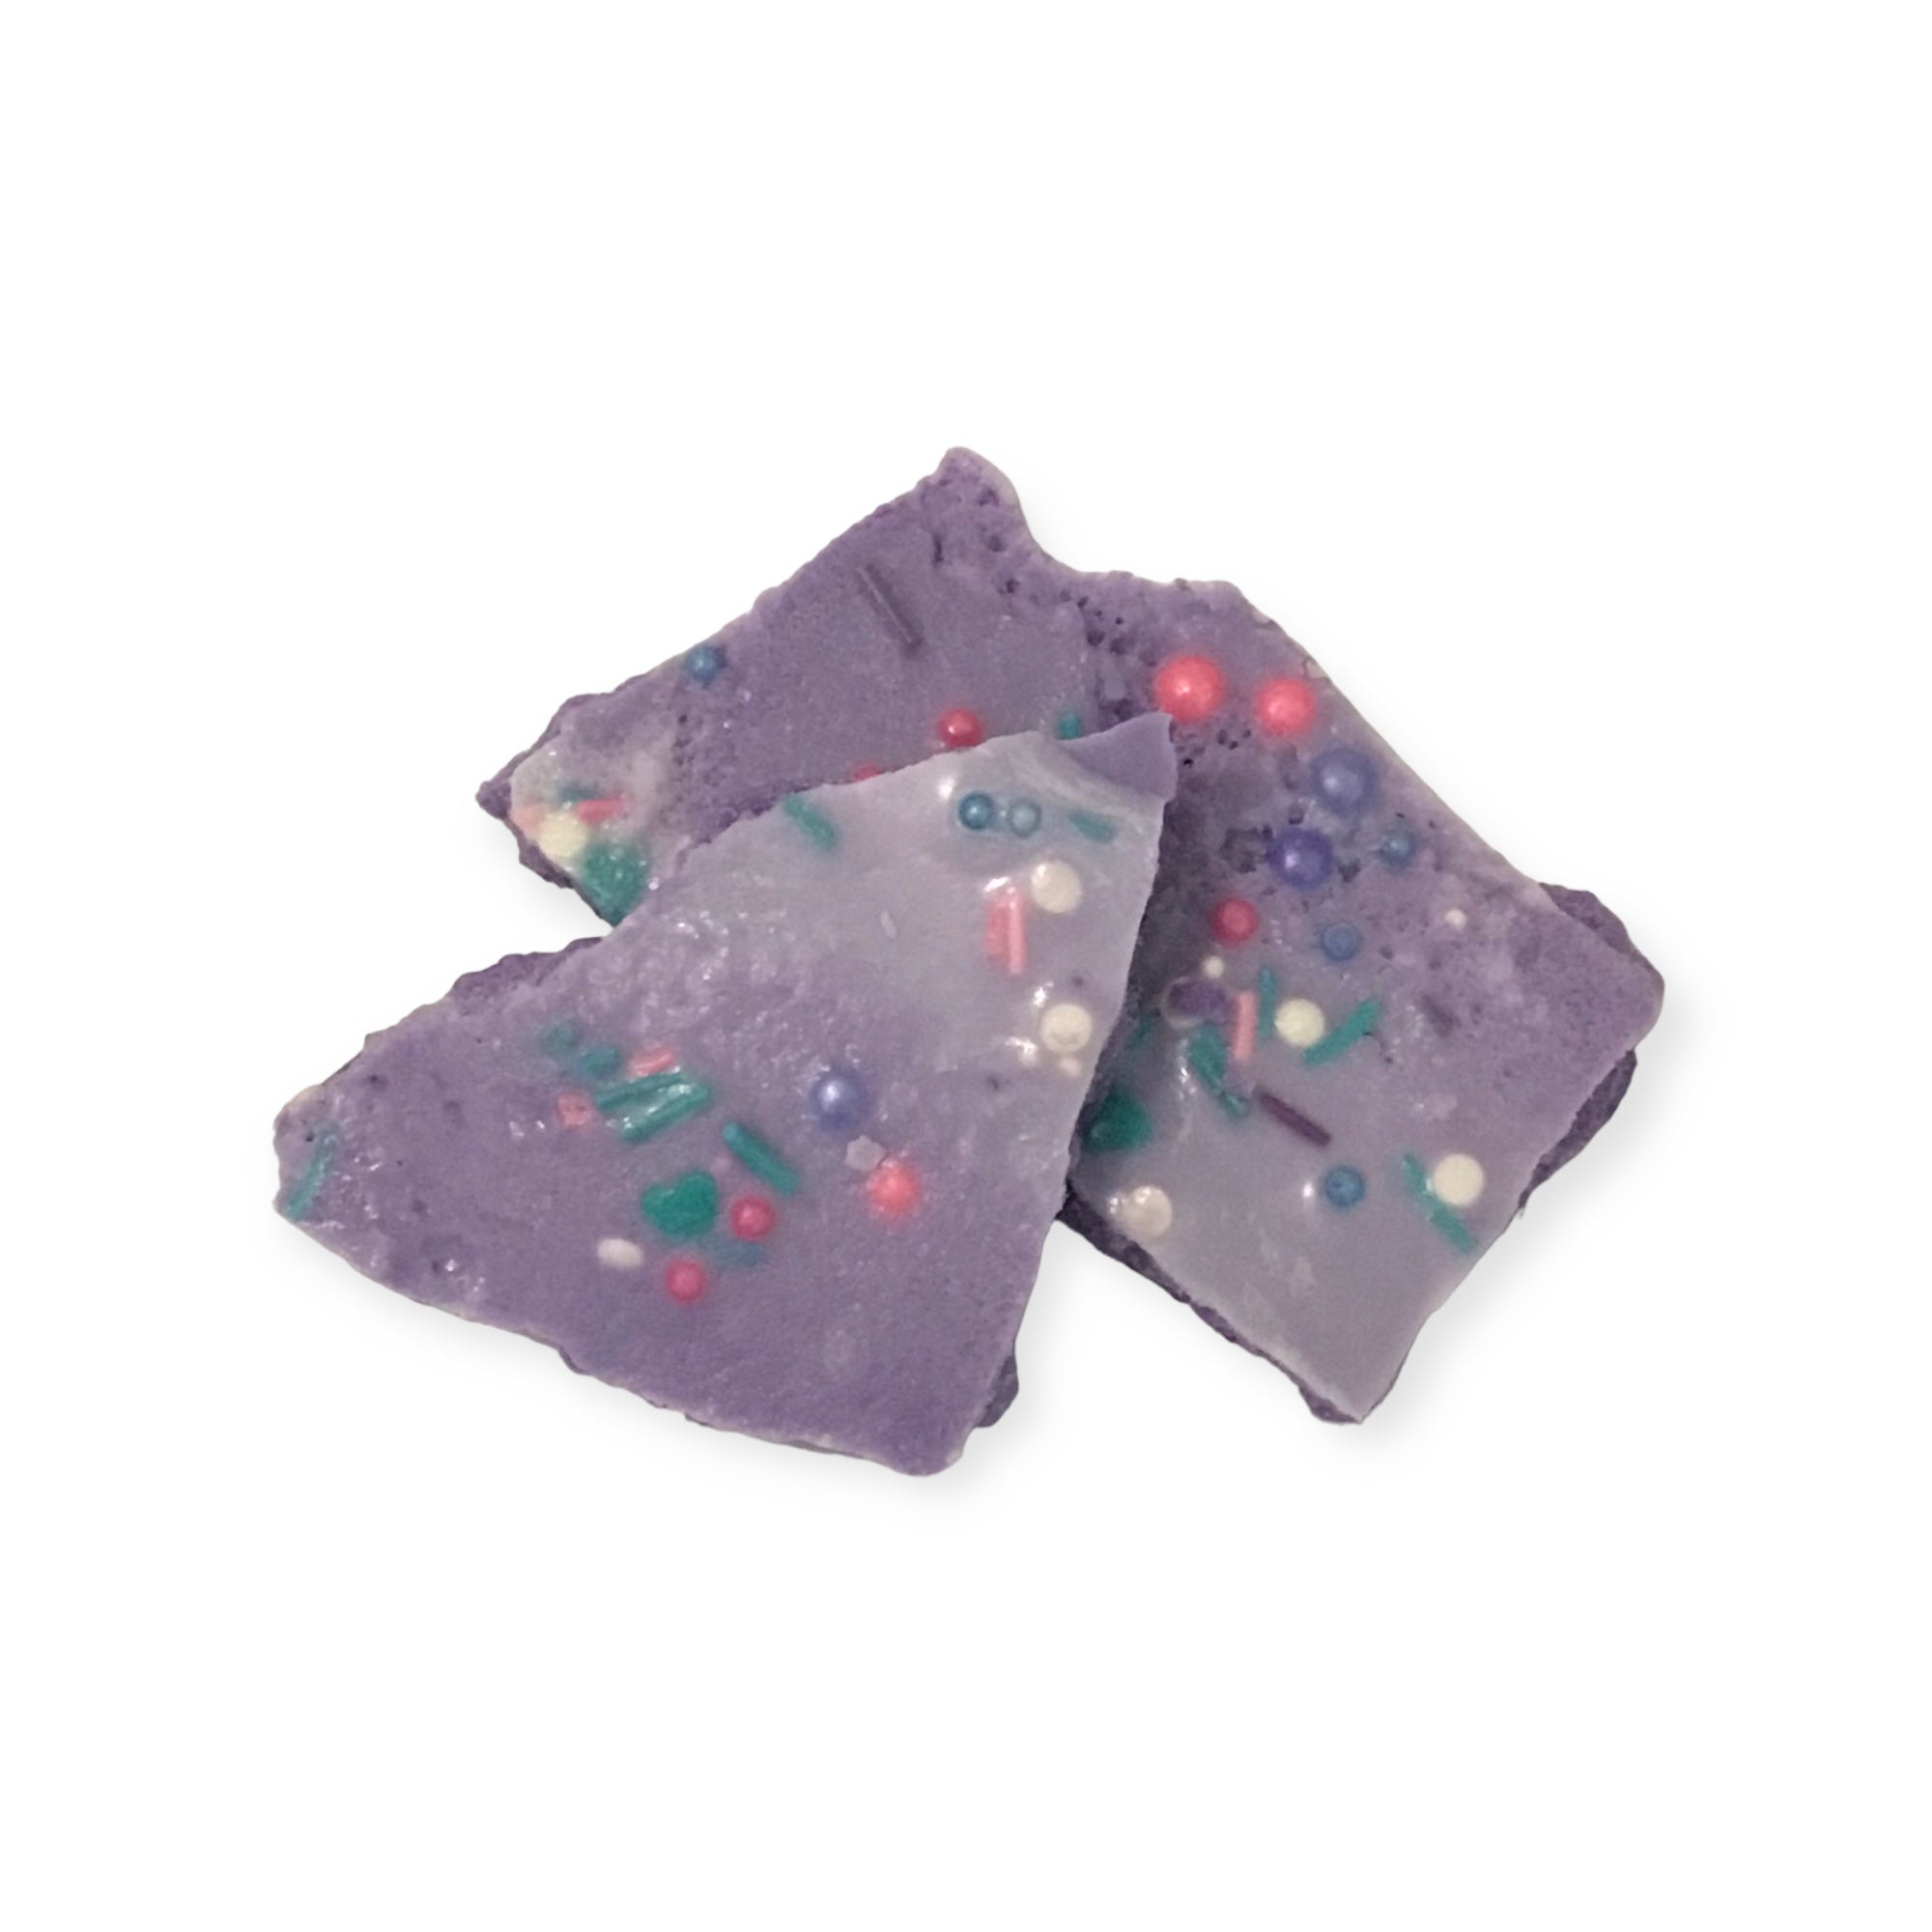 Light Purple colored soy wax bark in ugly sweater fragrance with embedded sprinkles of teal, white, pink and purple on a white background